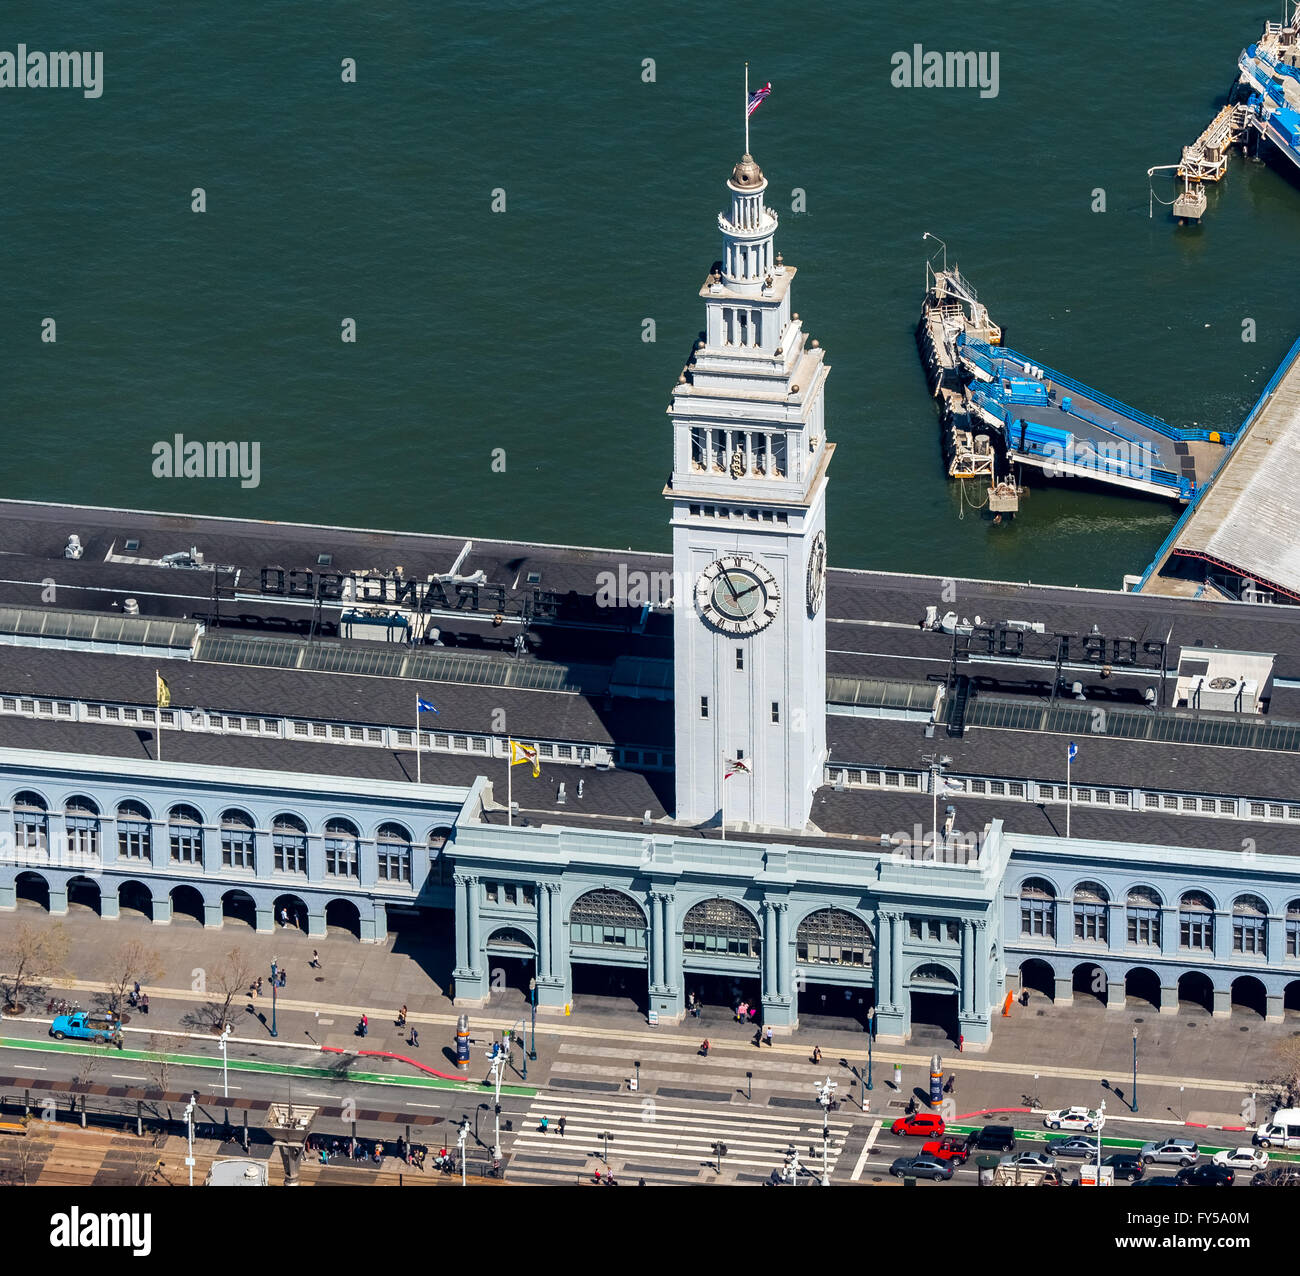 Aerial view, Ferry Building with clock tower, San Francisco, San Francisco Bay Area, California, USA Stock Photo